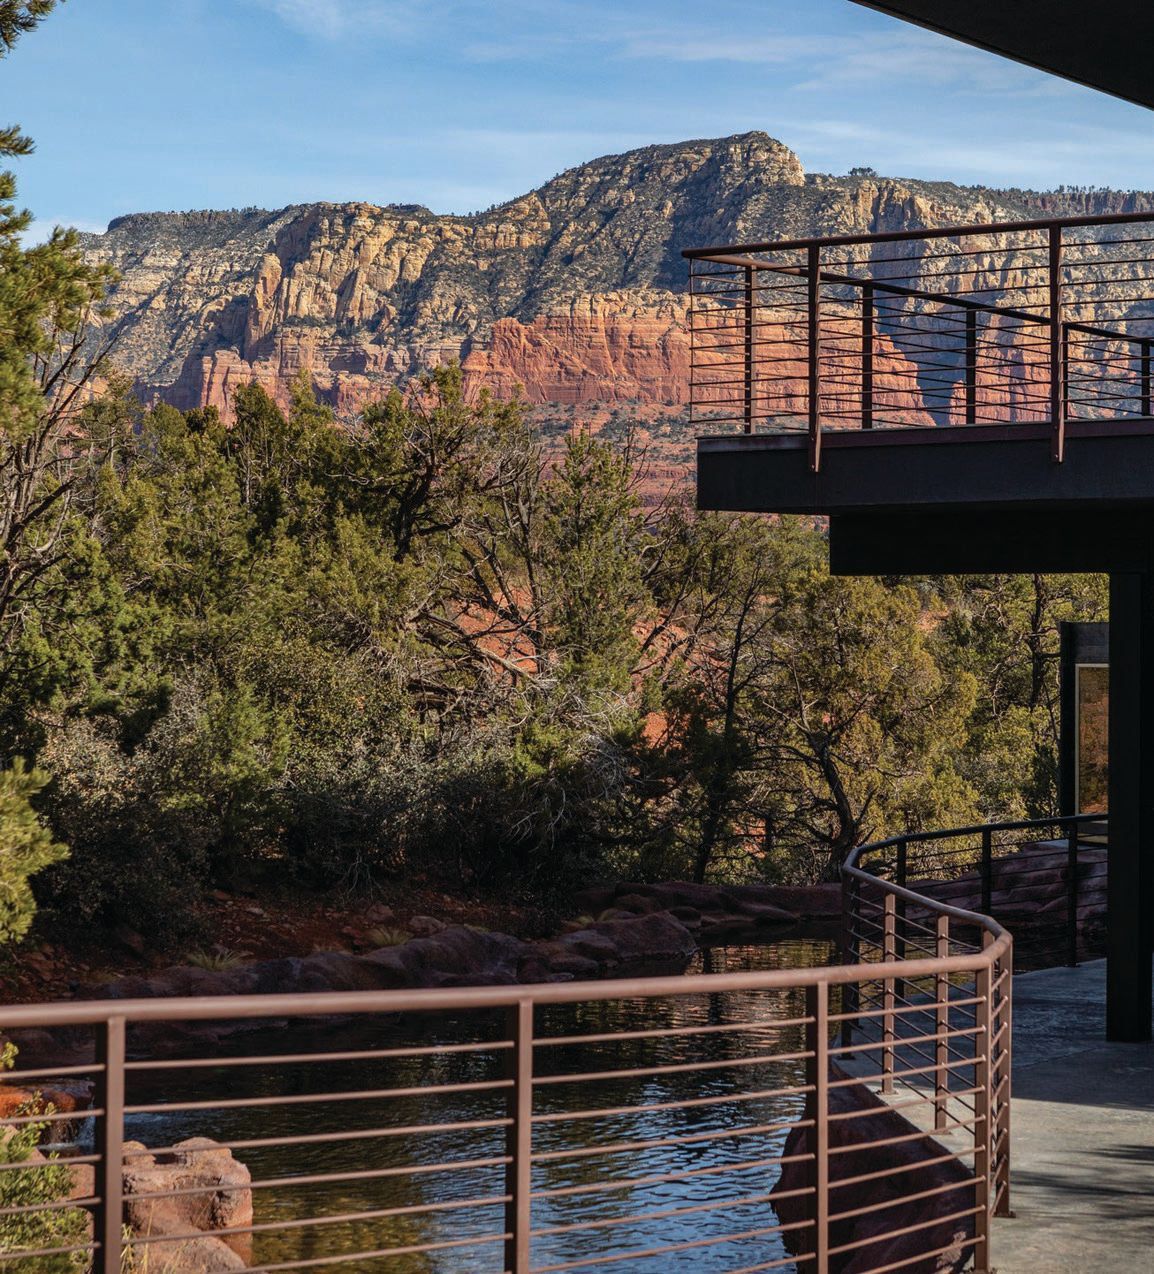 Ambiente Sedona offers pristine views of the Coconino National
Forest PHOTO BY JEFF ZARUBA